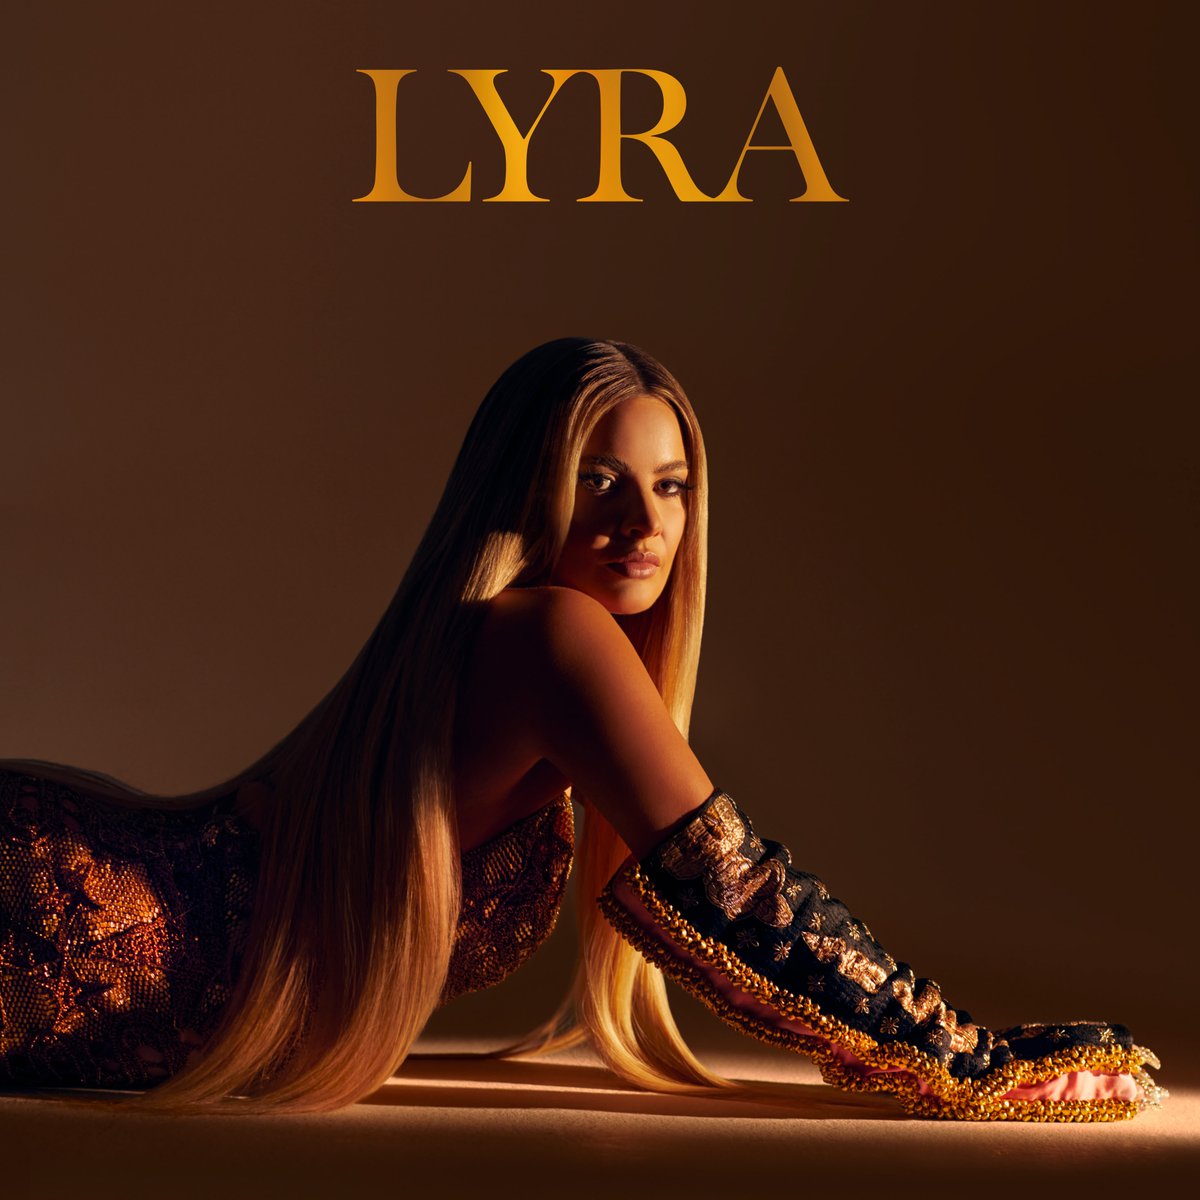 ⚜️ 'LYRA' IS OUT NOW ⚜️ The wait is finally over, the highly-anticipated debut album from @thisislyra 'LYRA' is OUT NOW! Featuring the chart-topping singles 'Chess,' 'Drink Me Up,' ‘Queen’ and 'Edge of Seventeen'. “Soulful, cool and vibrant, Lyra's debut feels both